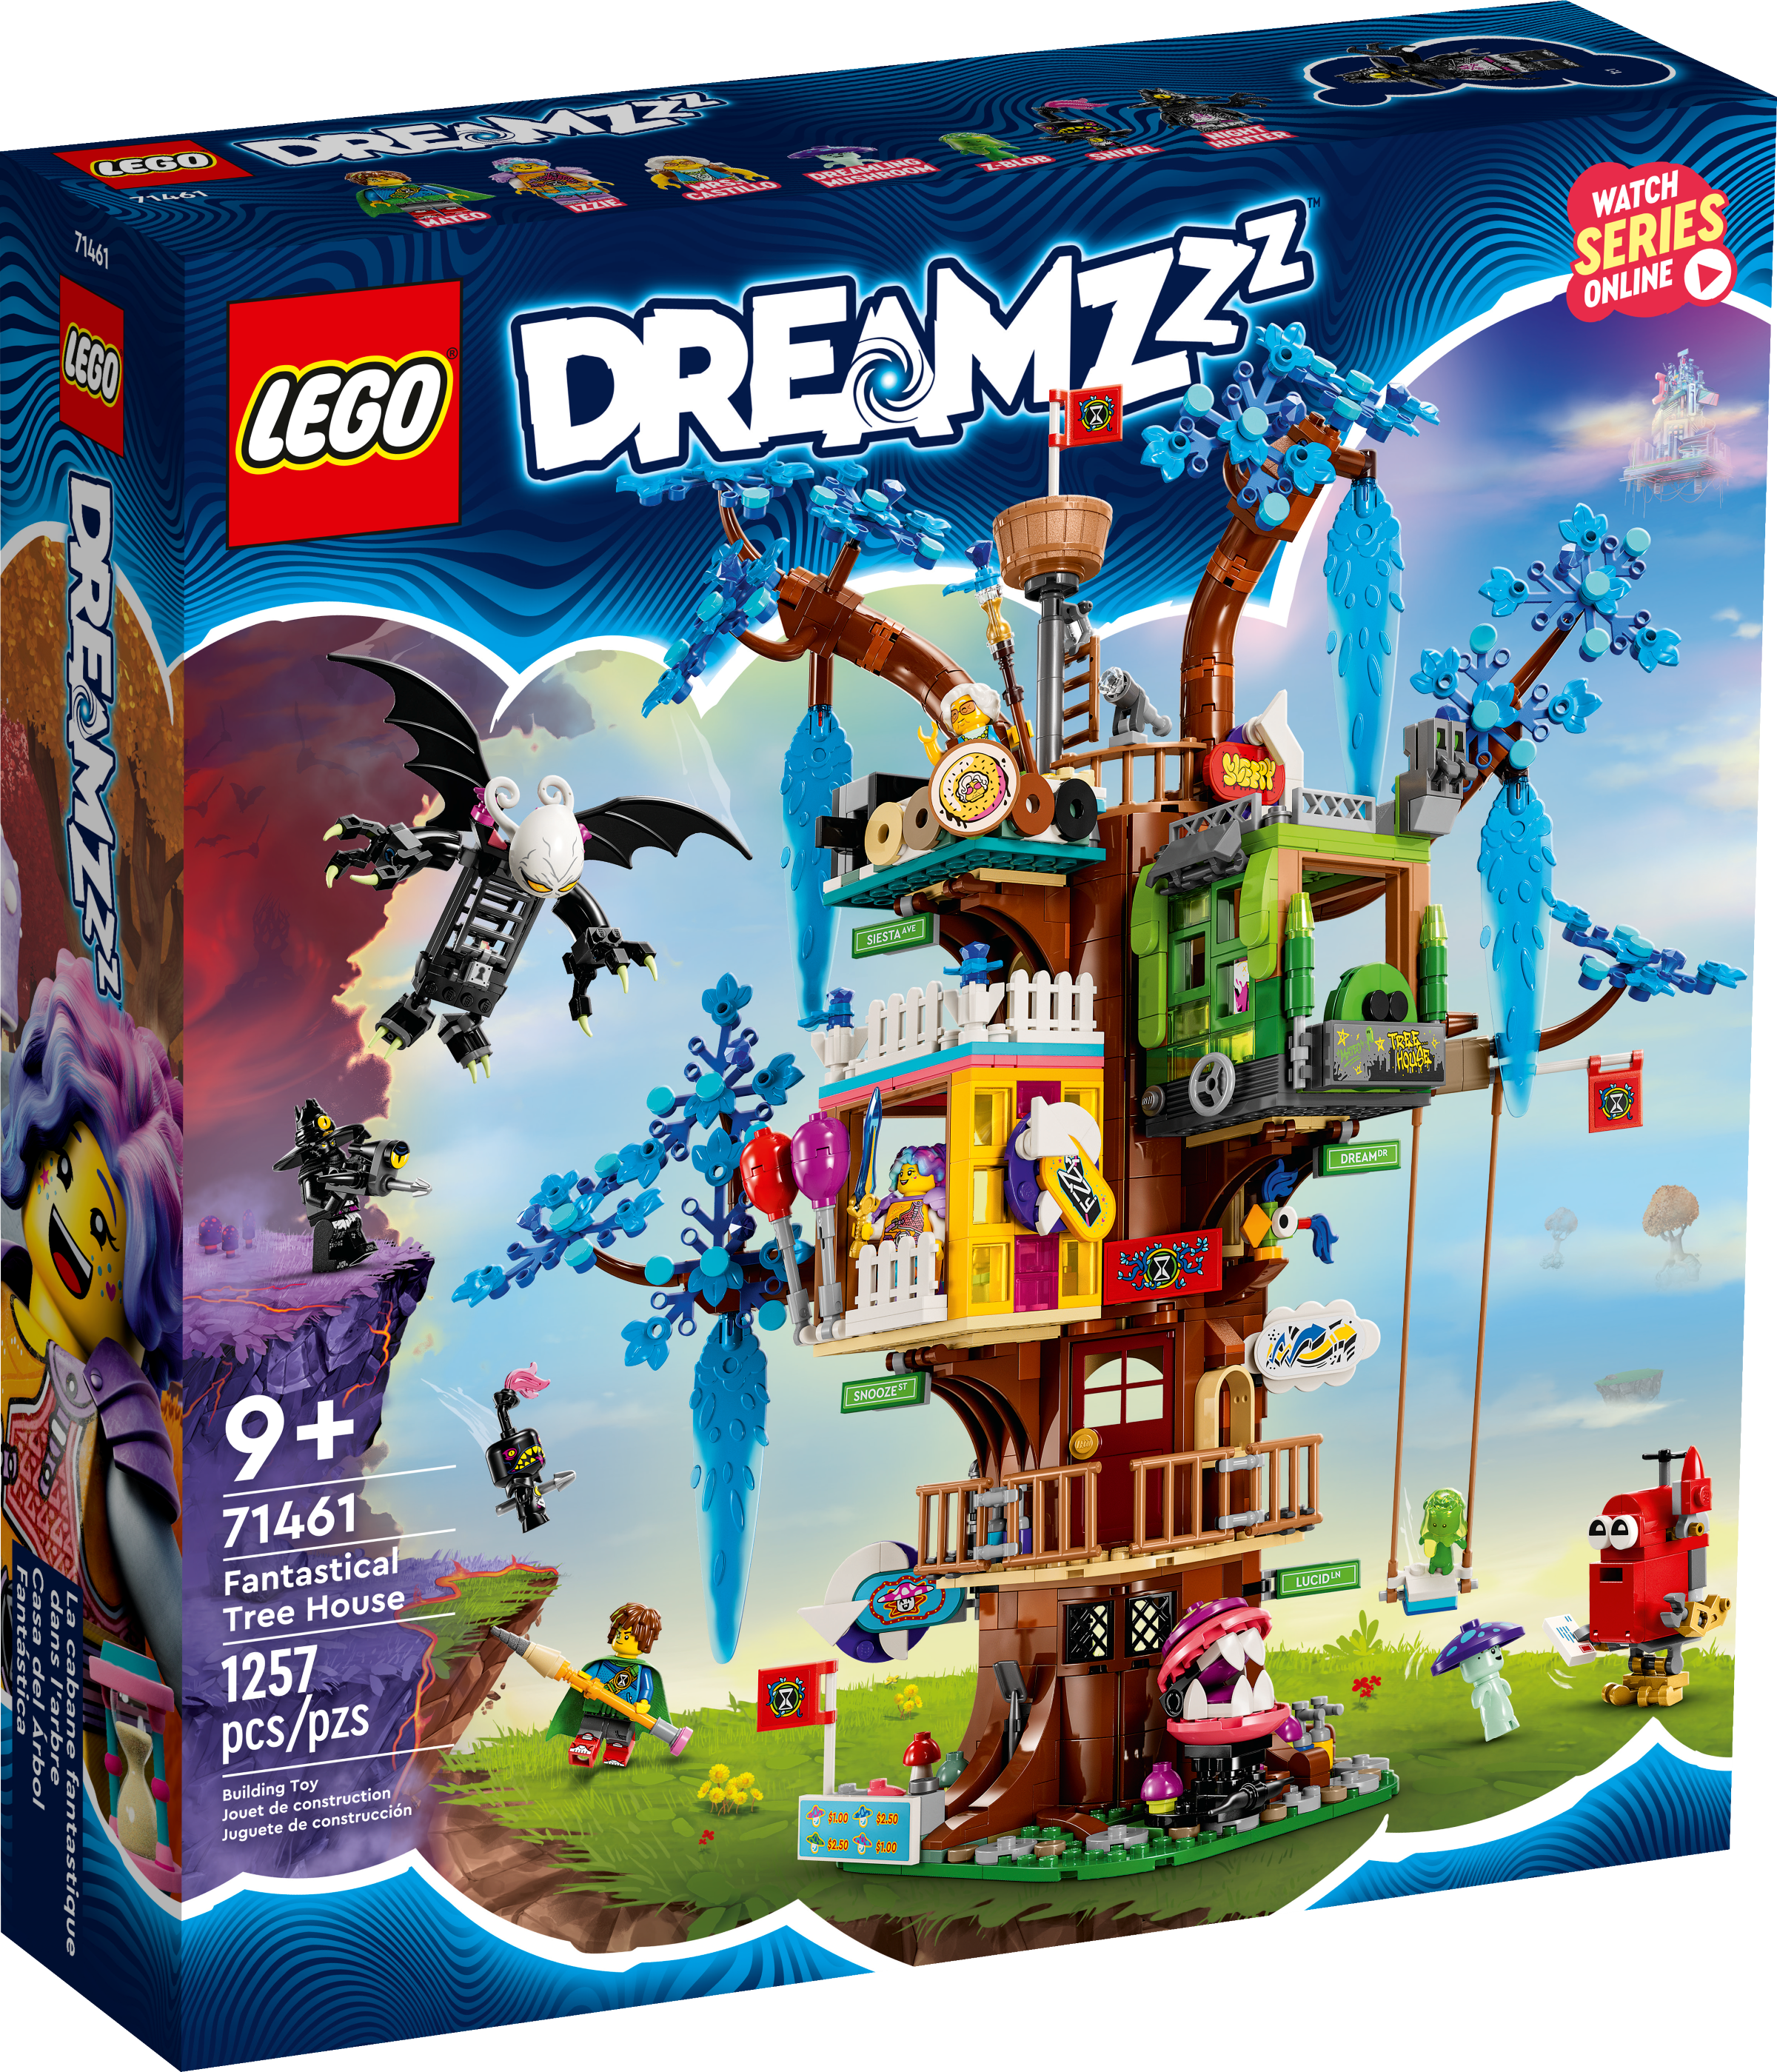 Fantastical Tree House 71461 | LEGO® DREAMZzz™ | Buy online at the